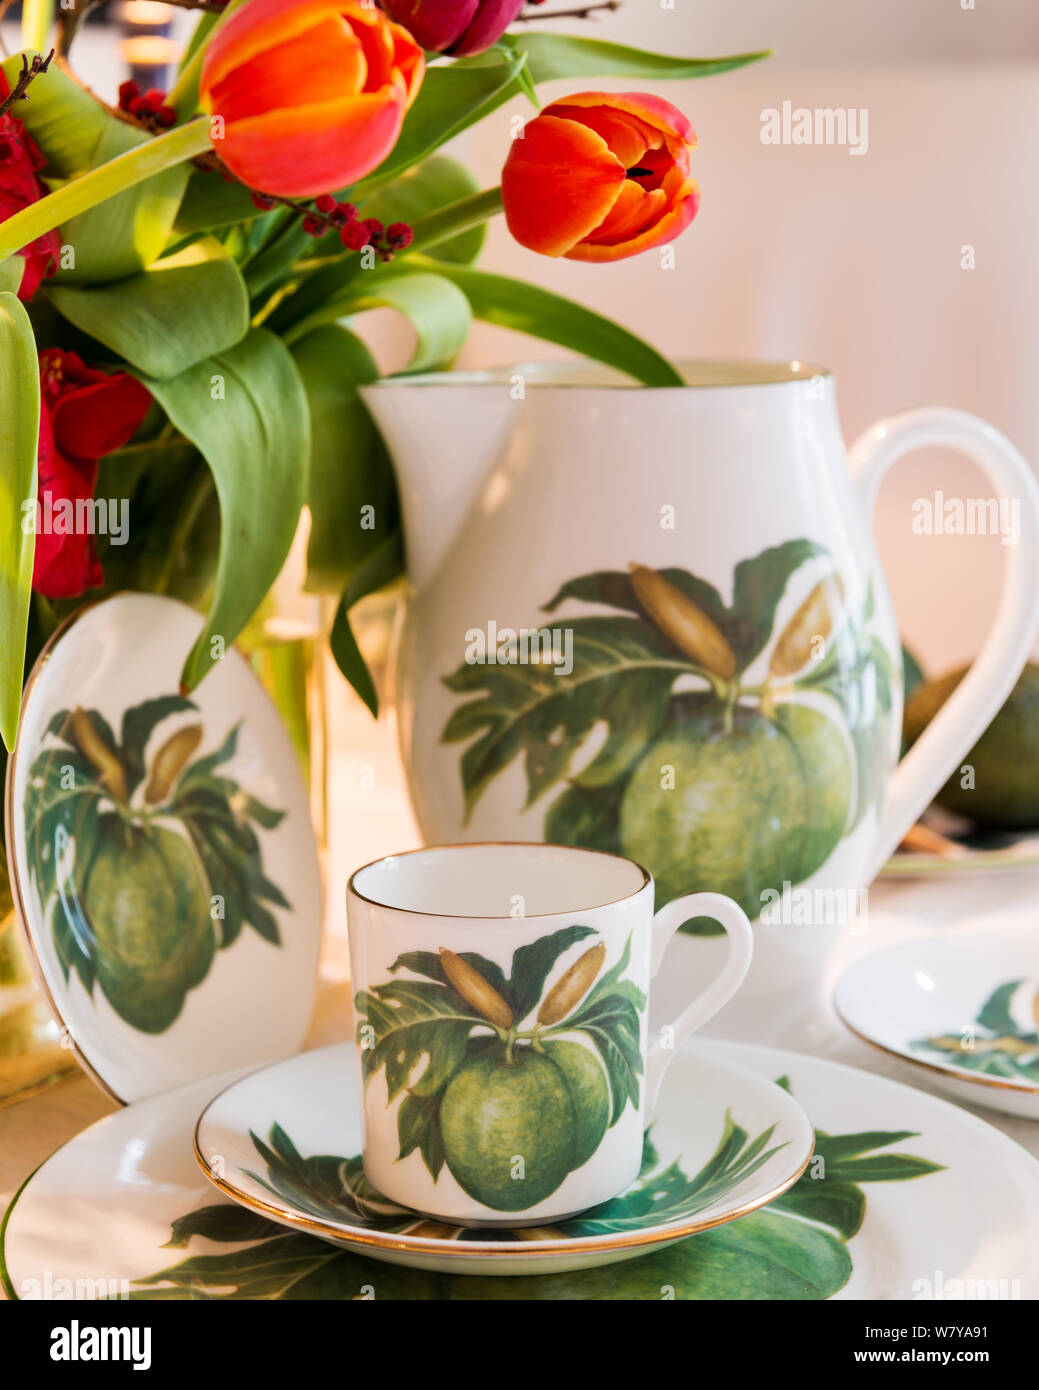 Jenny Mein's breadfruit collection by flowers Stock Photo